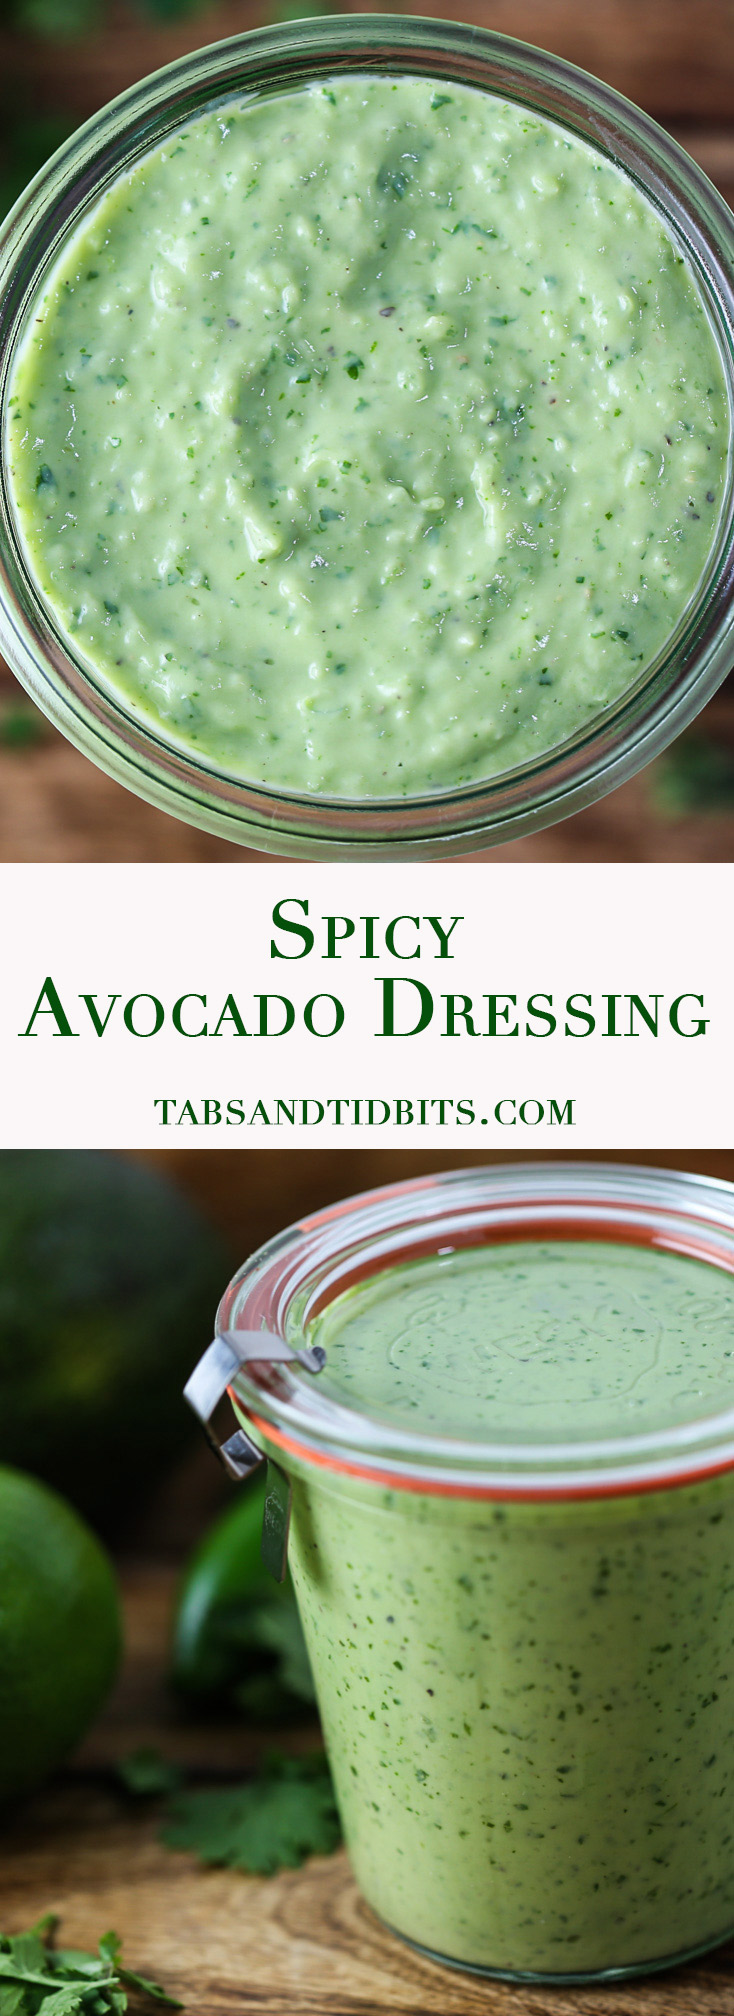 Spicy Avocado Dressing - A creamy and spicy dressing filled with avocados, jalapenos, cilantro,and garlic.